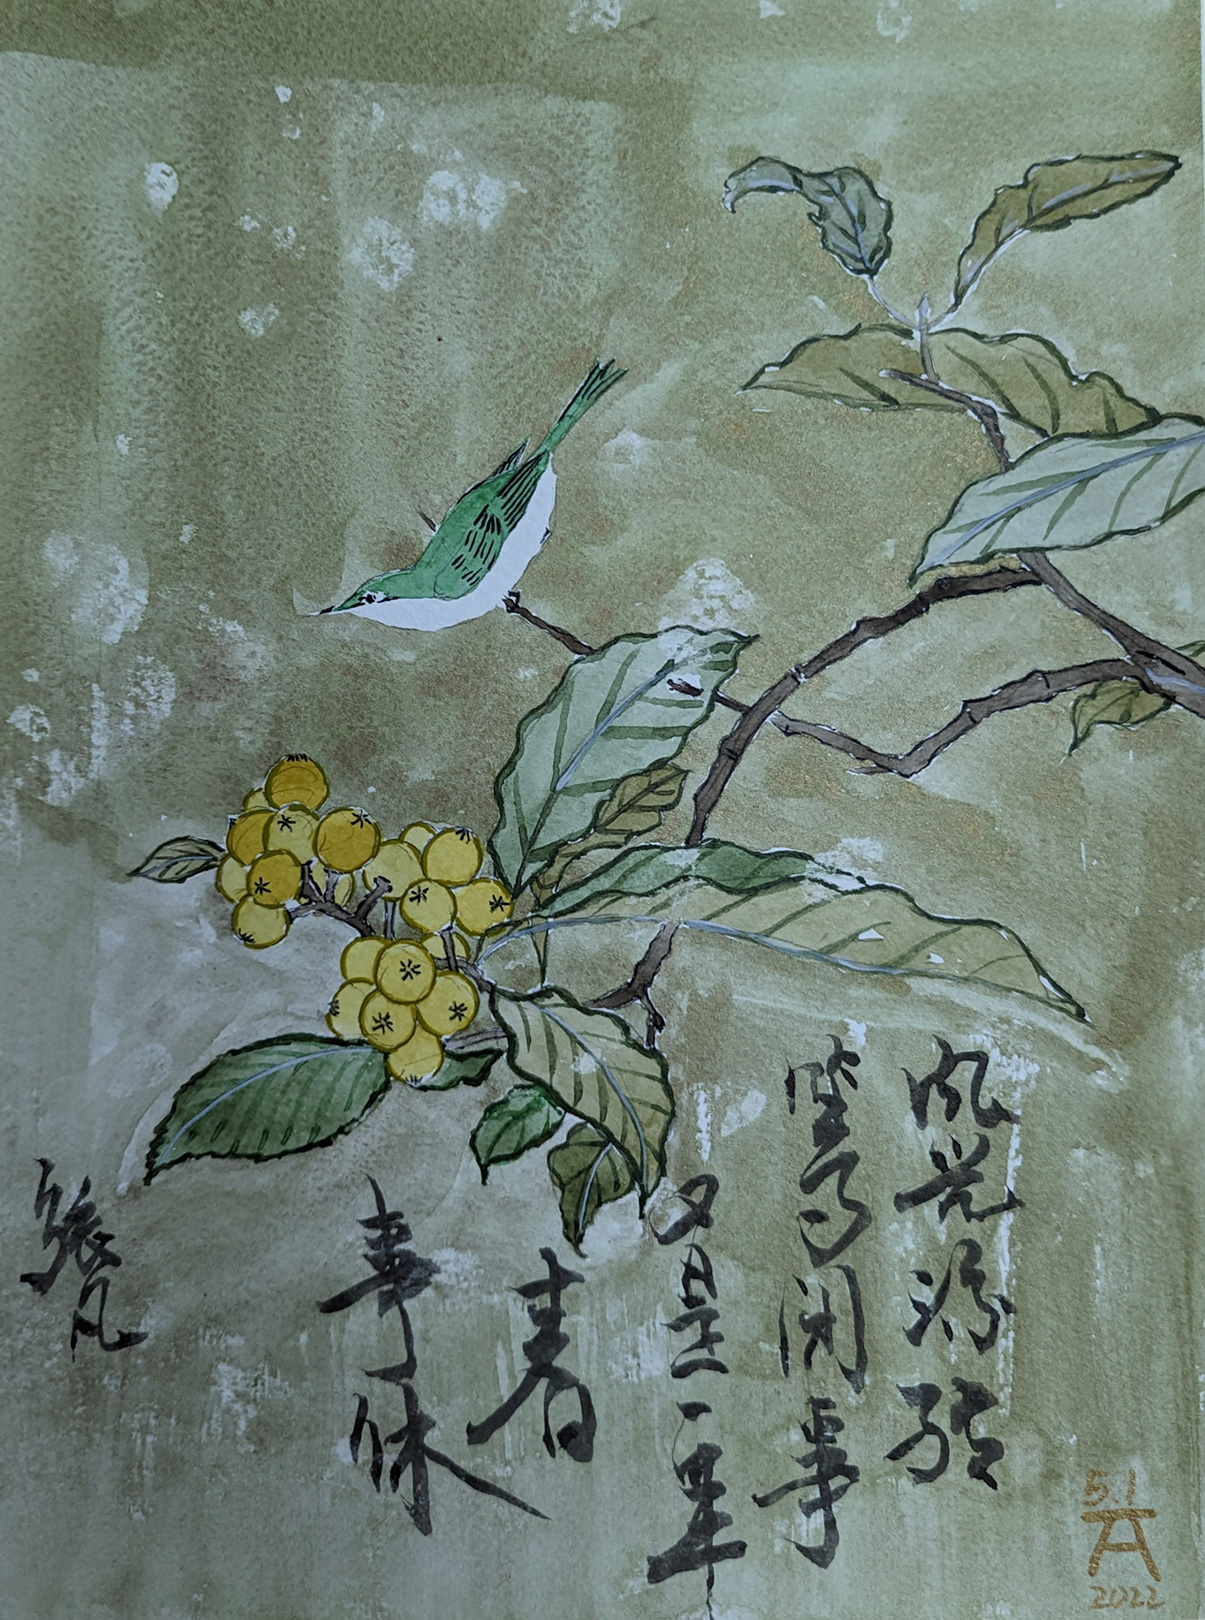 Loquats and Mountain Bird - Southern Song Dynasty by Fan Stanbrough